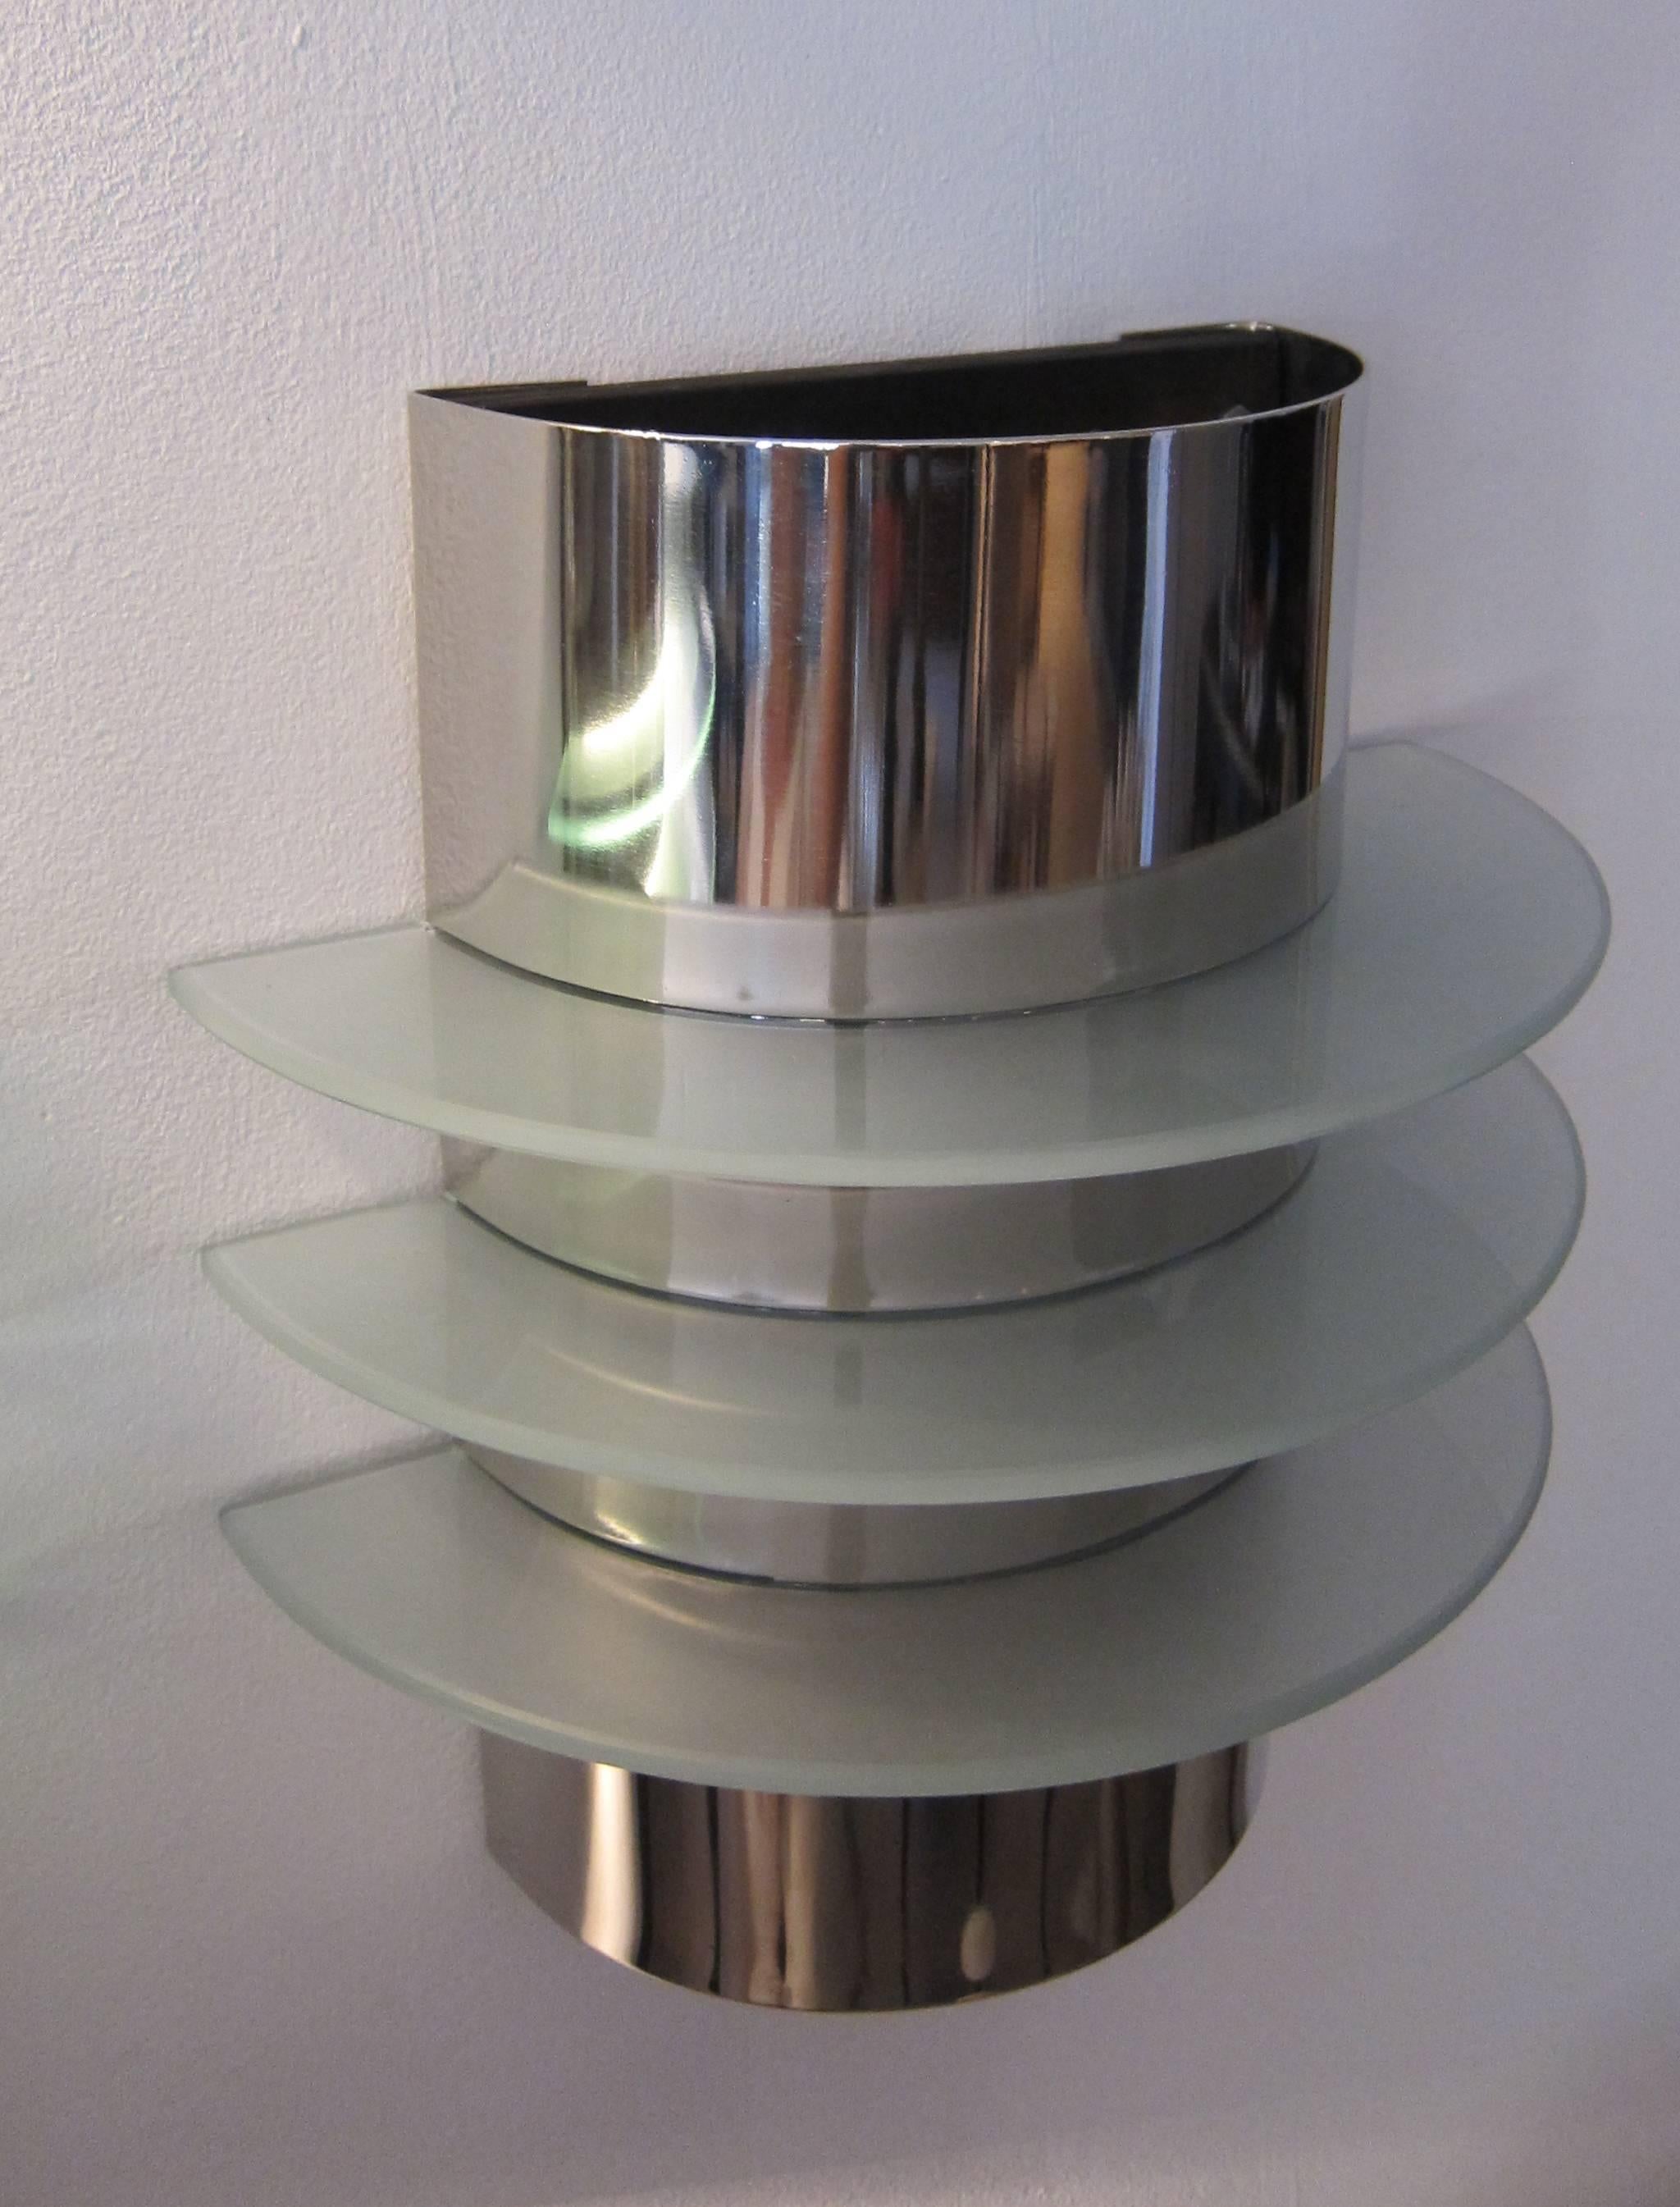 American  Group of Six Art Deco style Chrome and Glass Wall Lights.